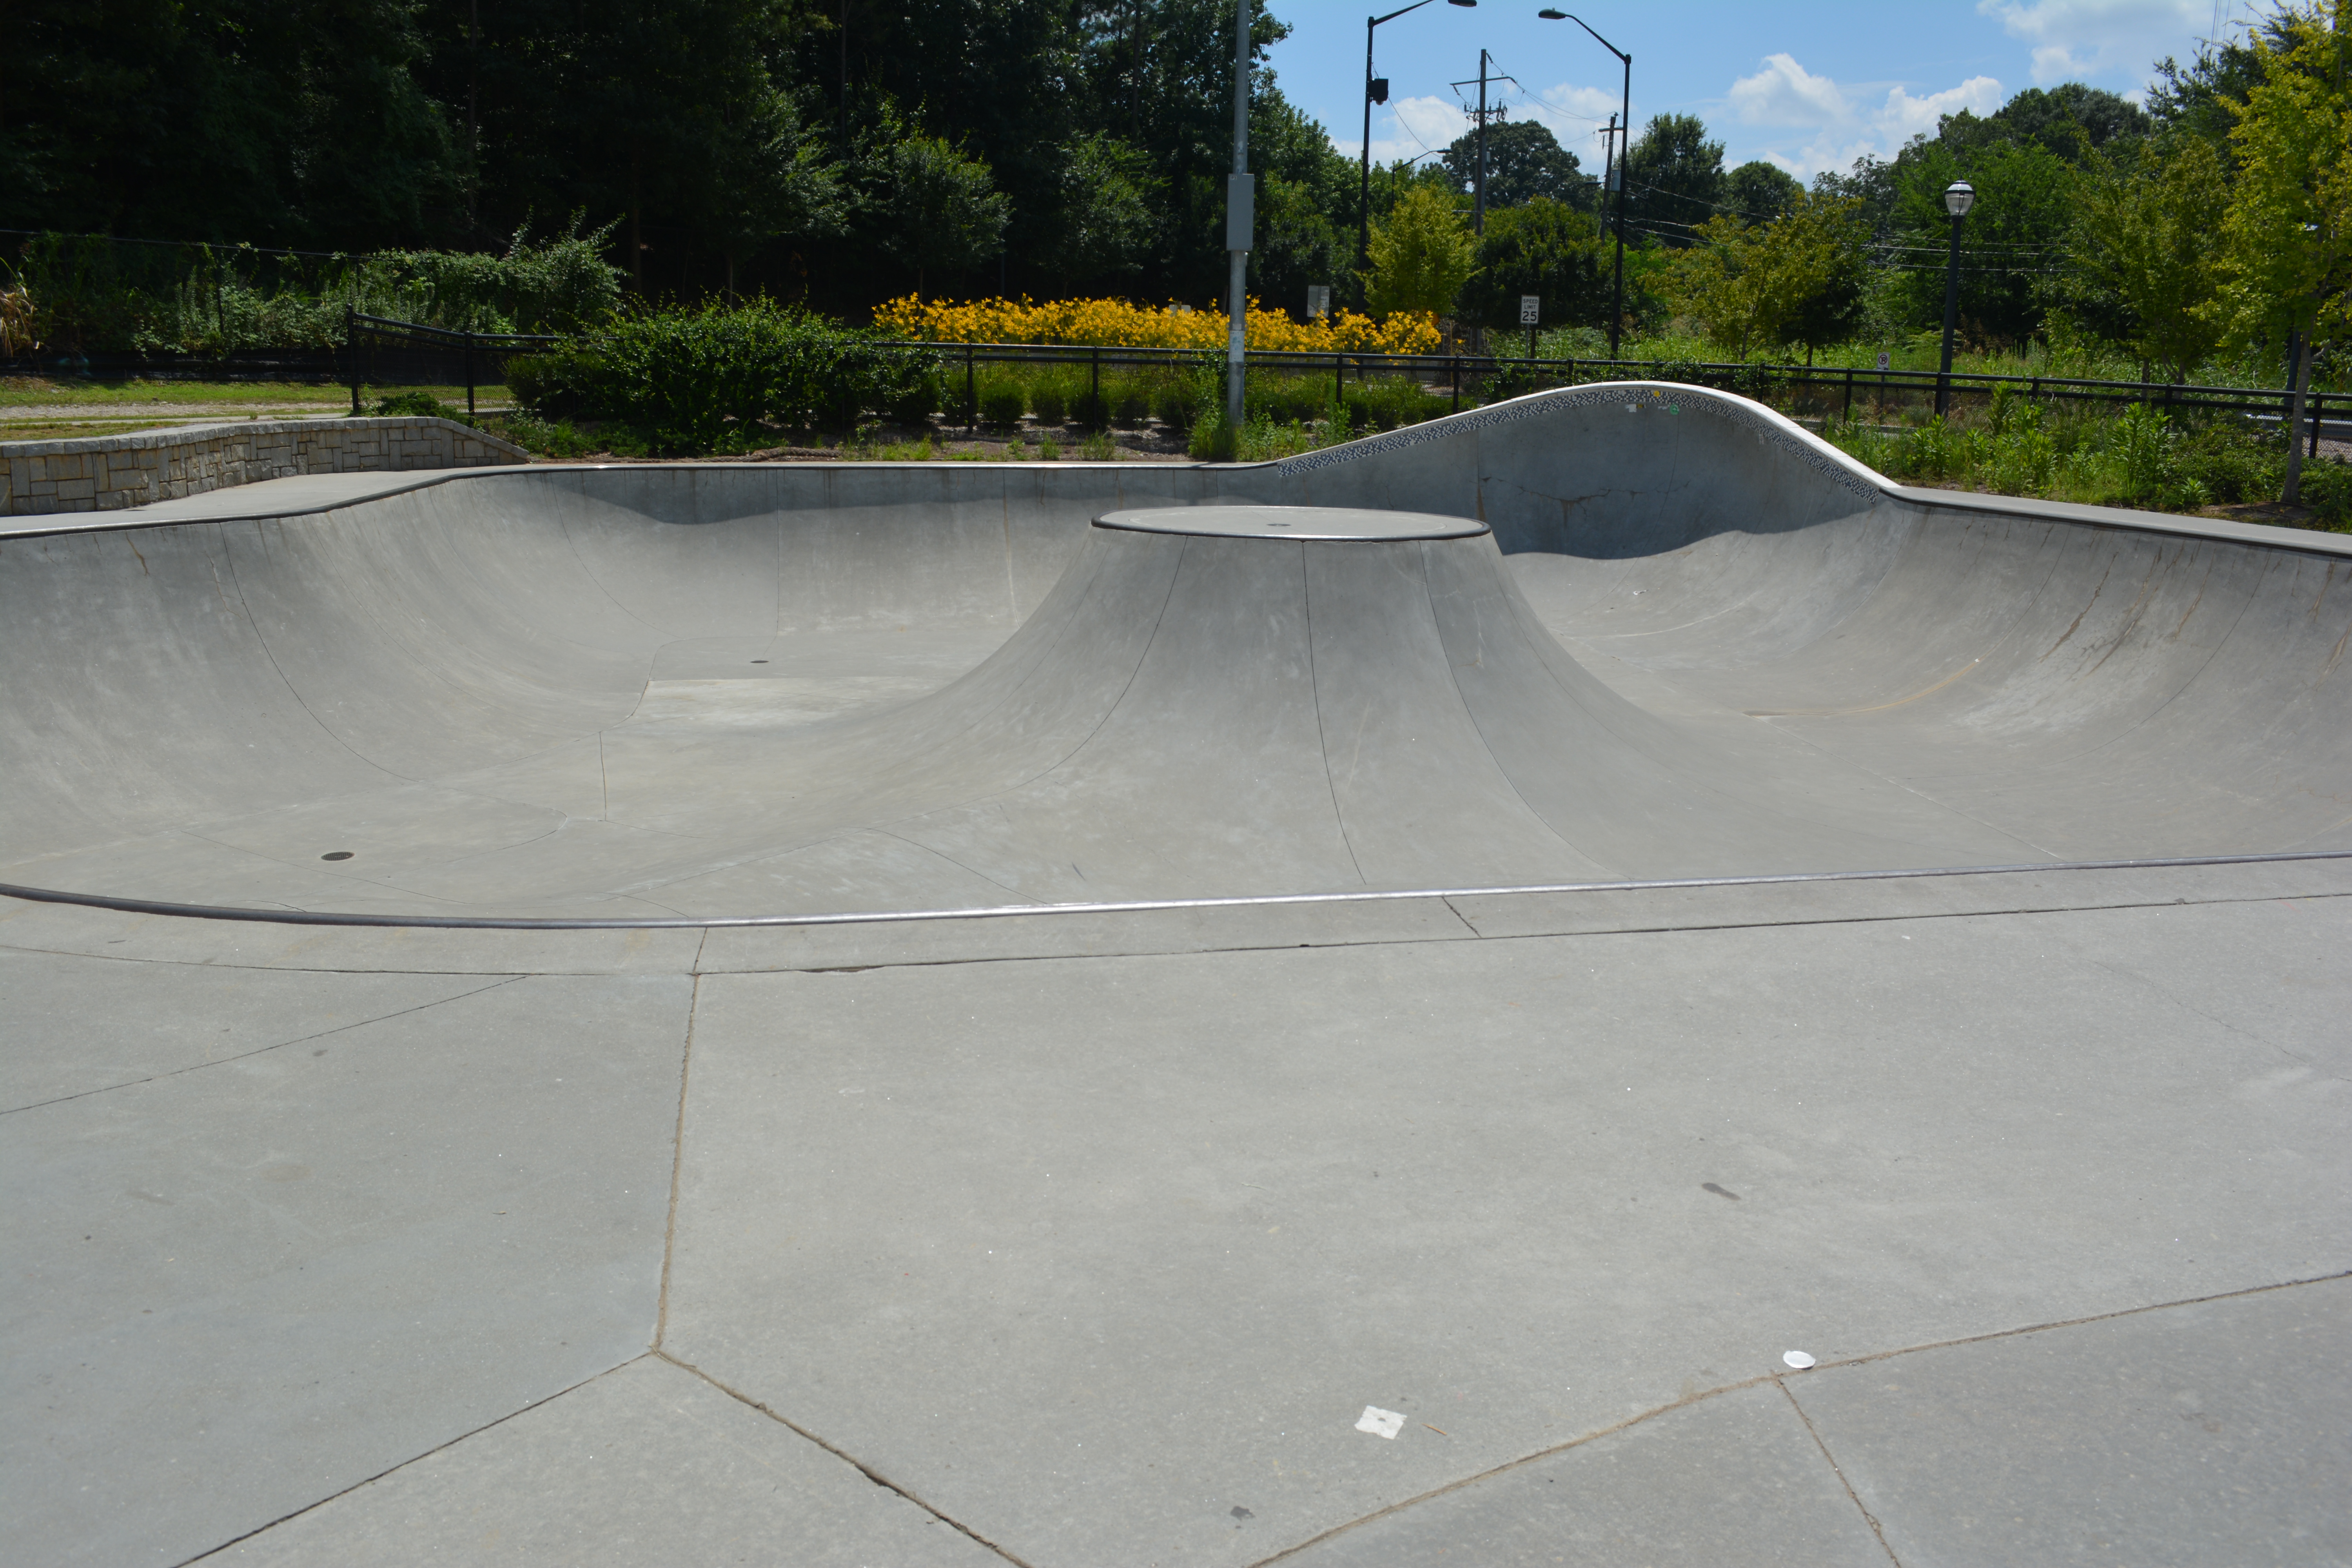 The park features a “vulcano,” which is a space between two quarter pipes.